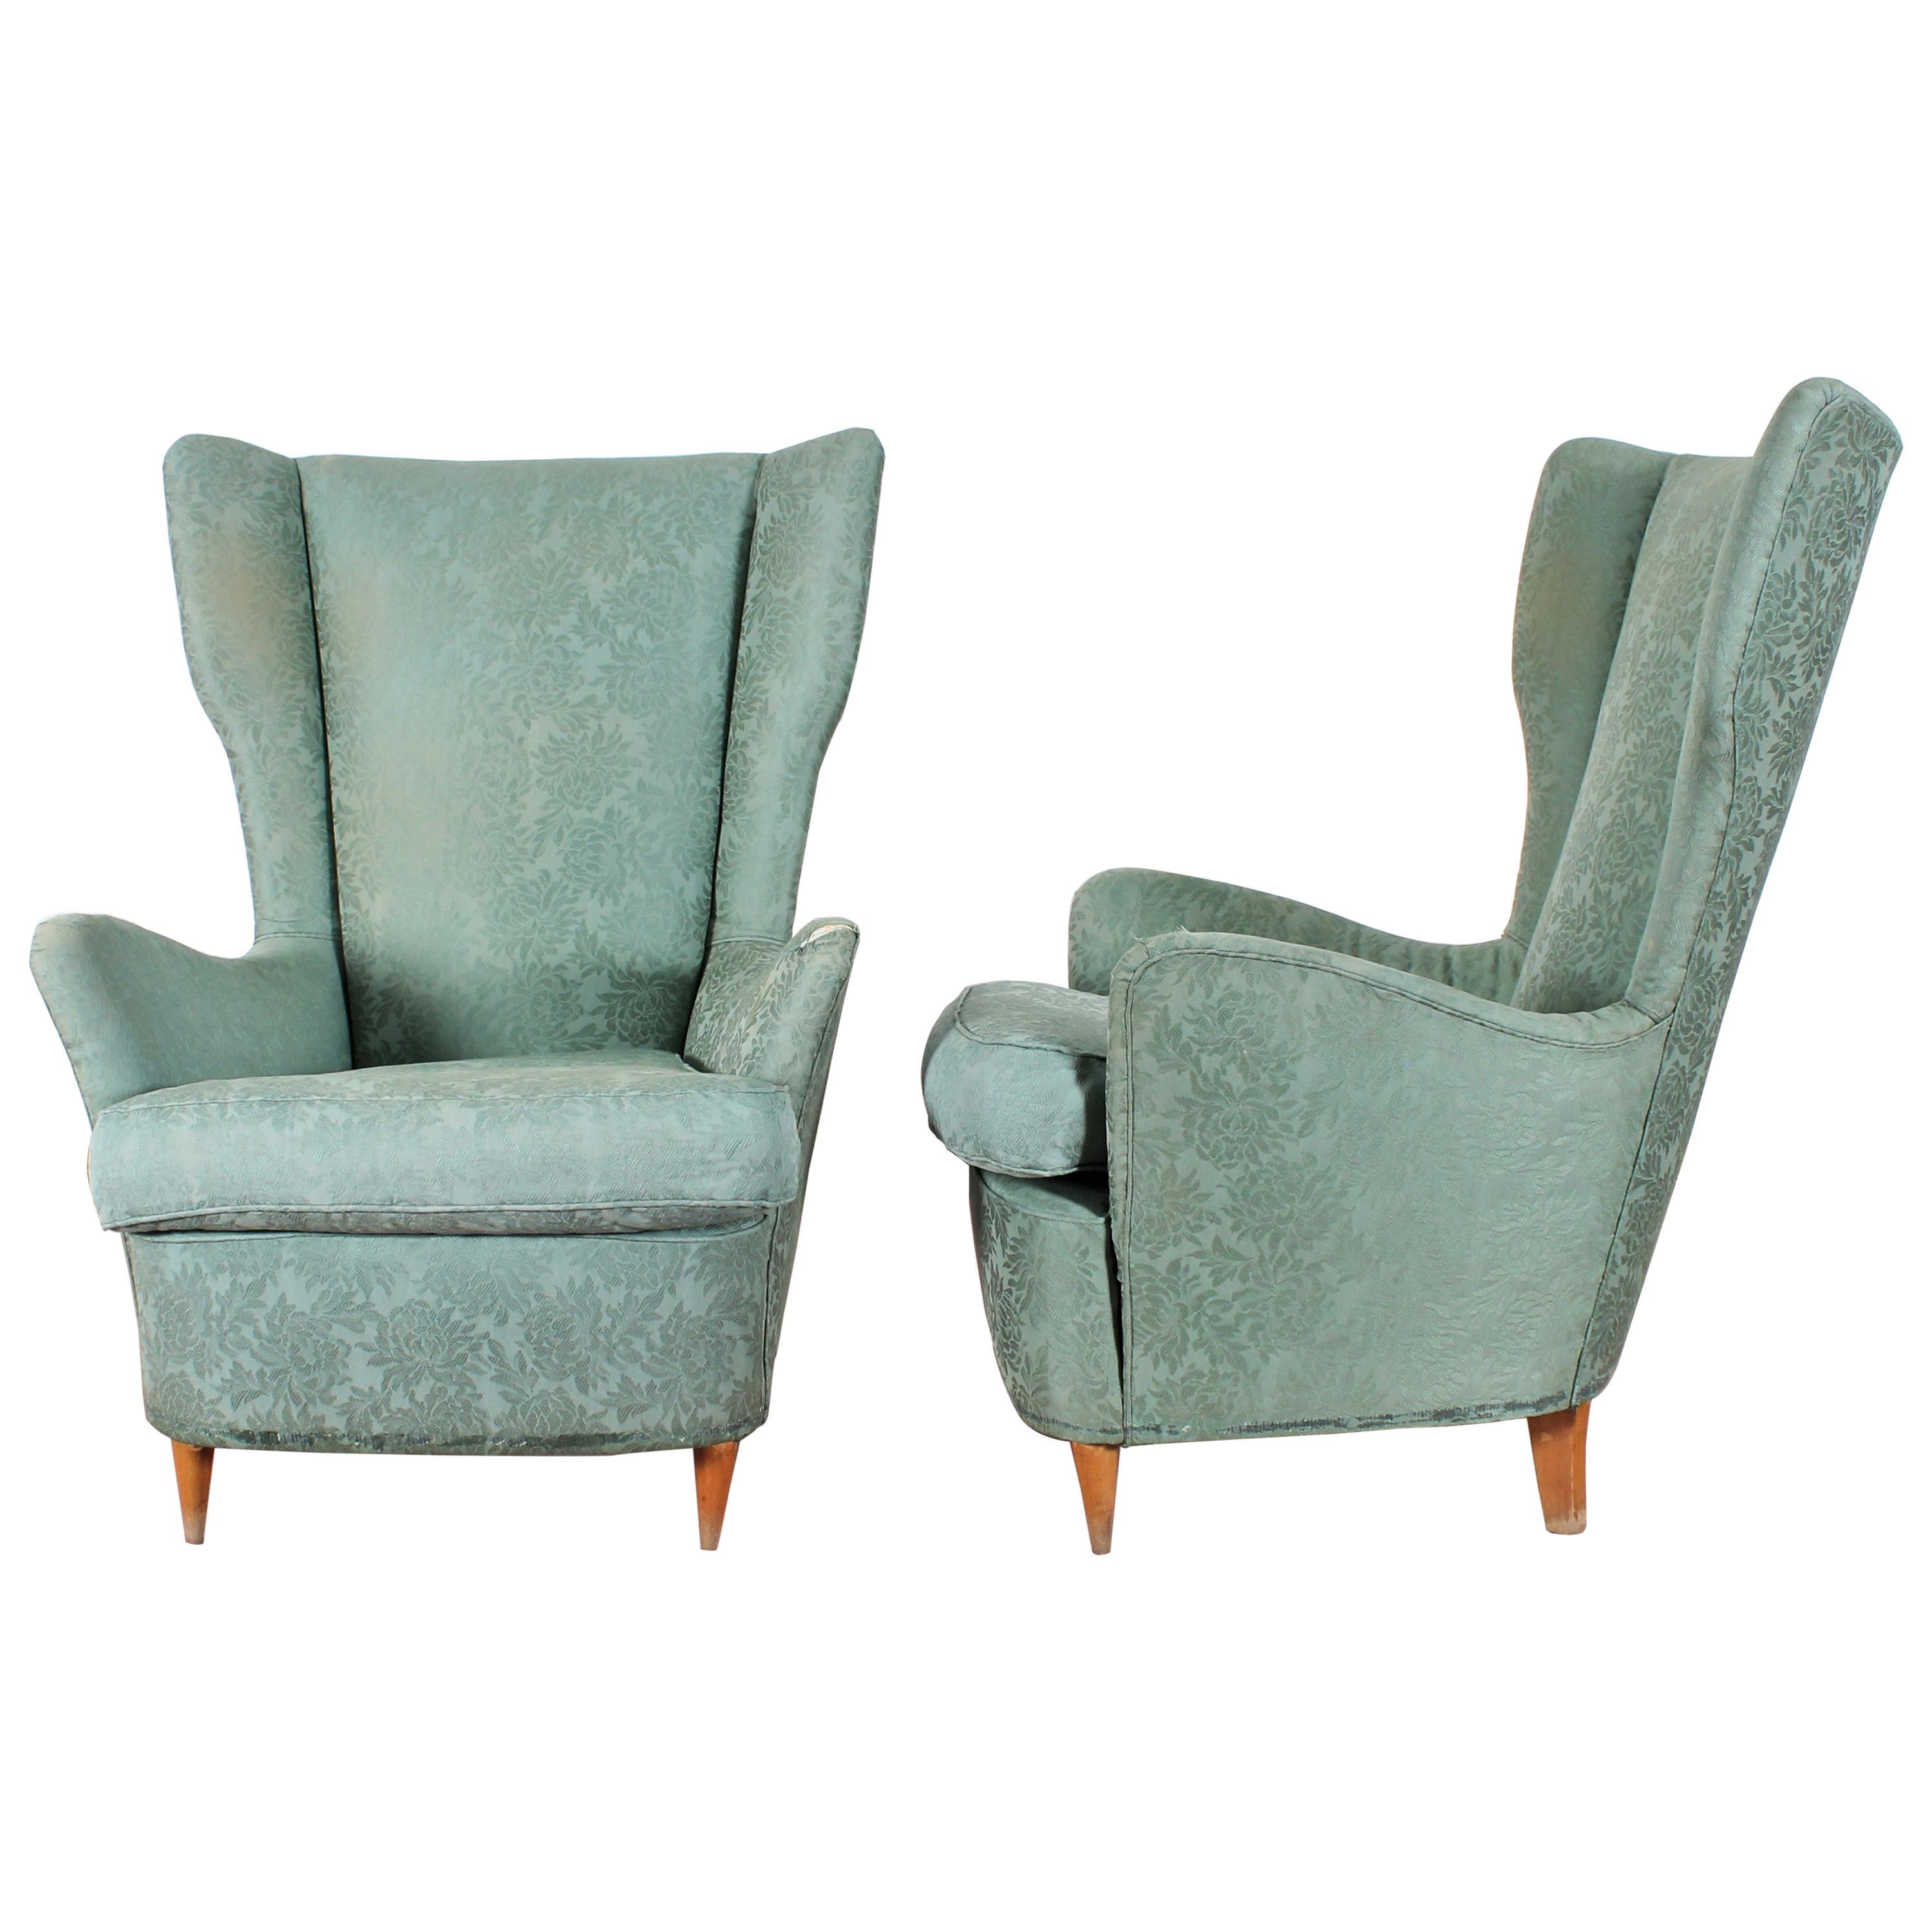 Midcentury Gio Ponti for ISA Pair of Armchairs Green Fabric, Italy, 1950s